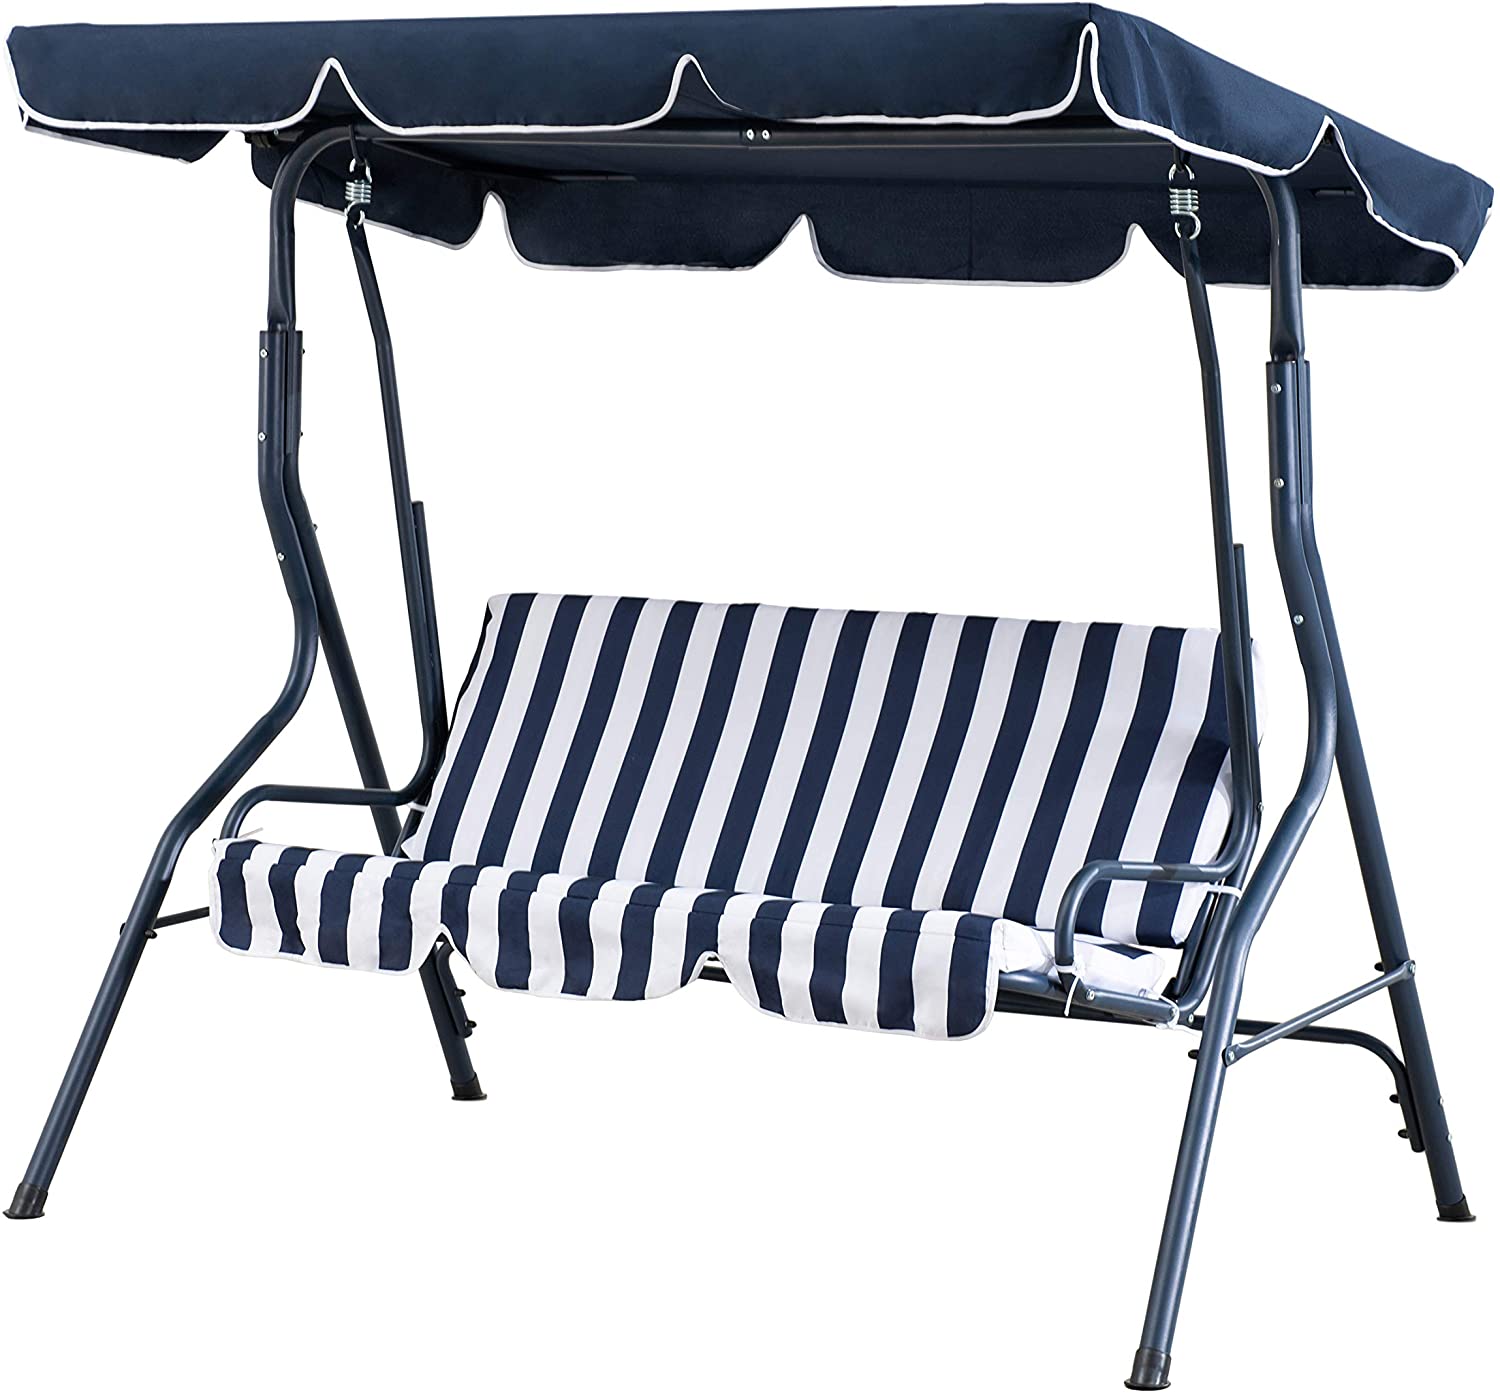 Woot!, Amazon Basics Outdoor 2-Seat Striped Patio Swing with Canopy, Dark Blue and White, $79.99, Free shipping for Prime